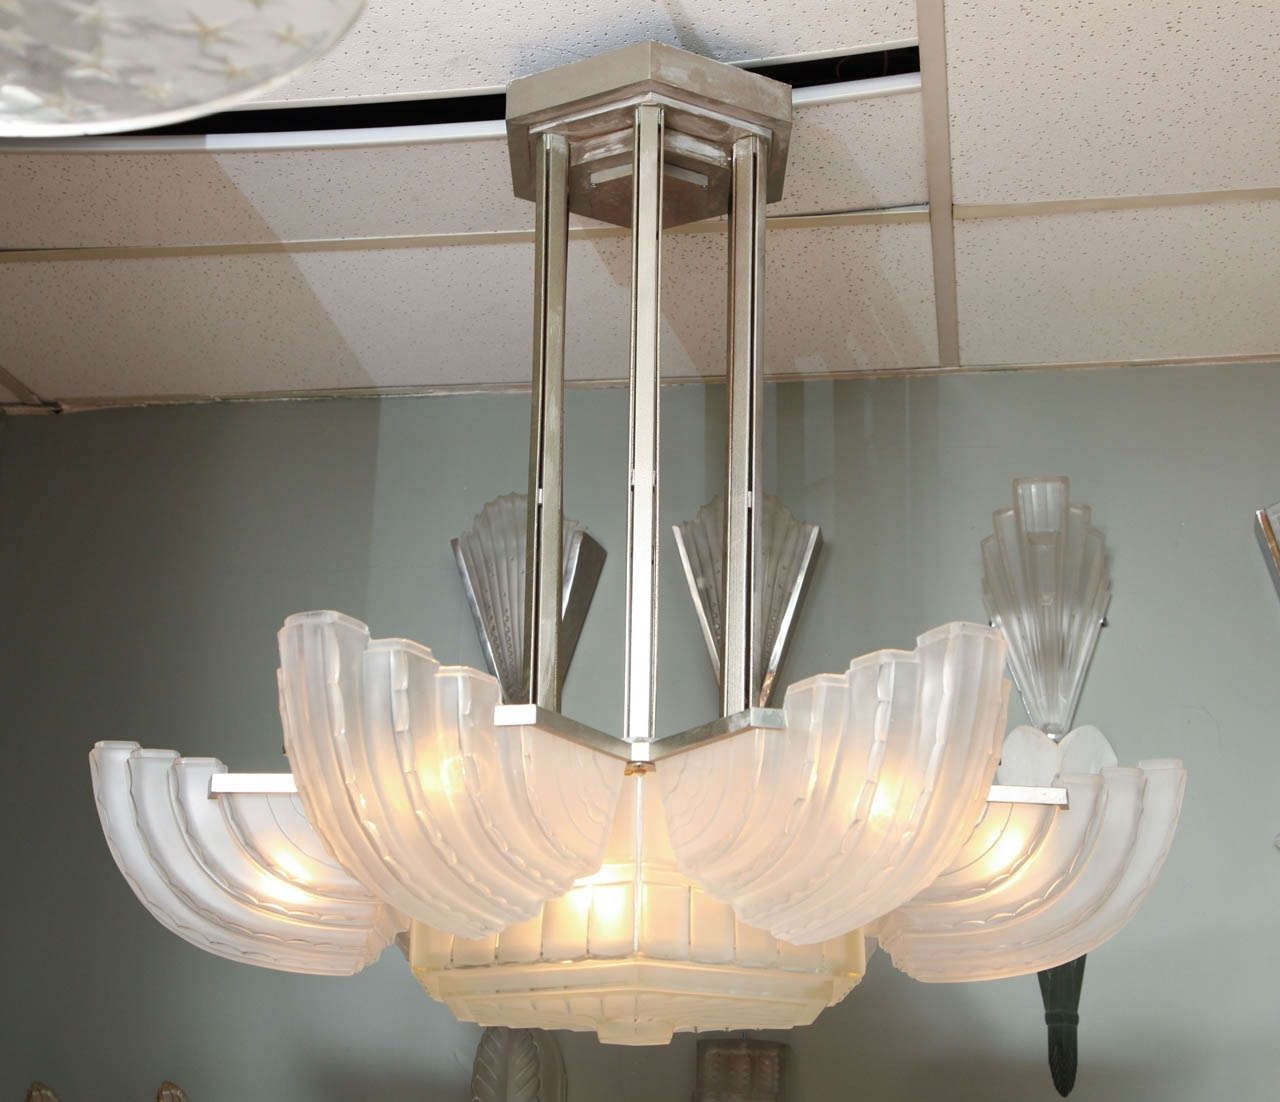 Fashionable Large Art Deco Chandelier Pertaining To Large And Important Art Deco Chandeliersabino – Paul Stamati Gallery (View 11 of 15)